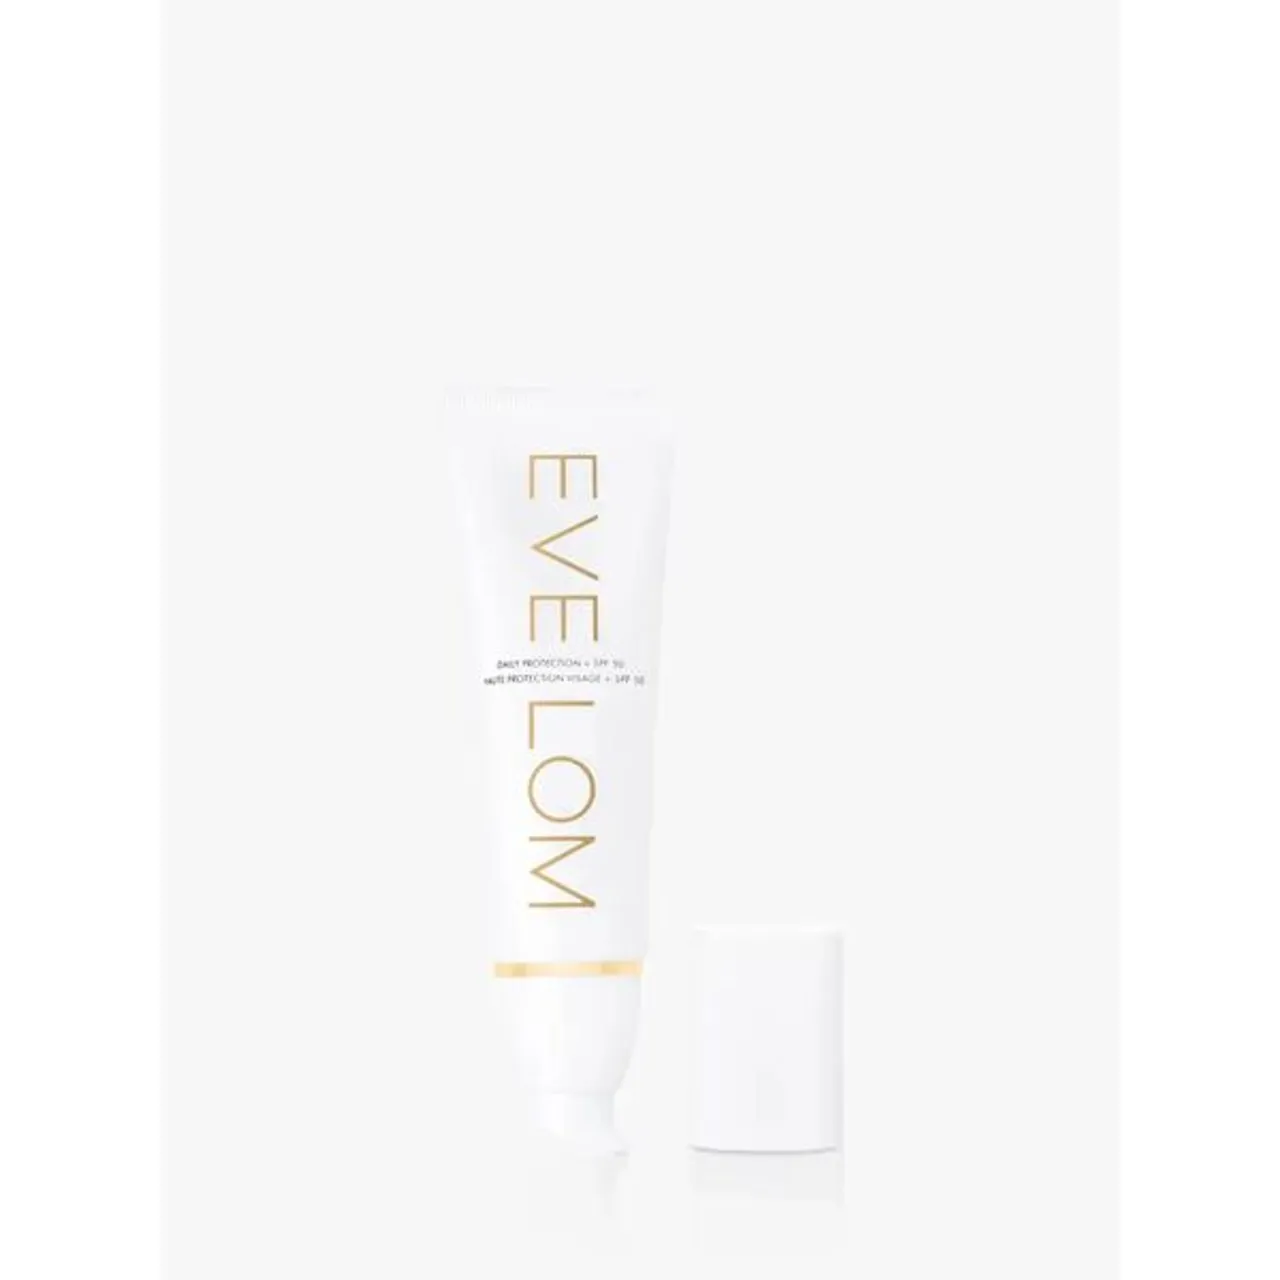 EVE LOM Daily Protection + SPF 50, 50ml - Unisex - Size: 50ml